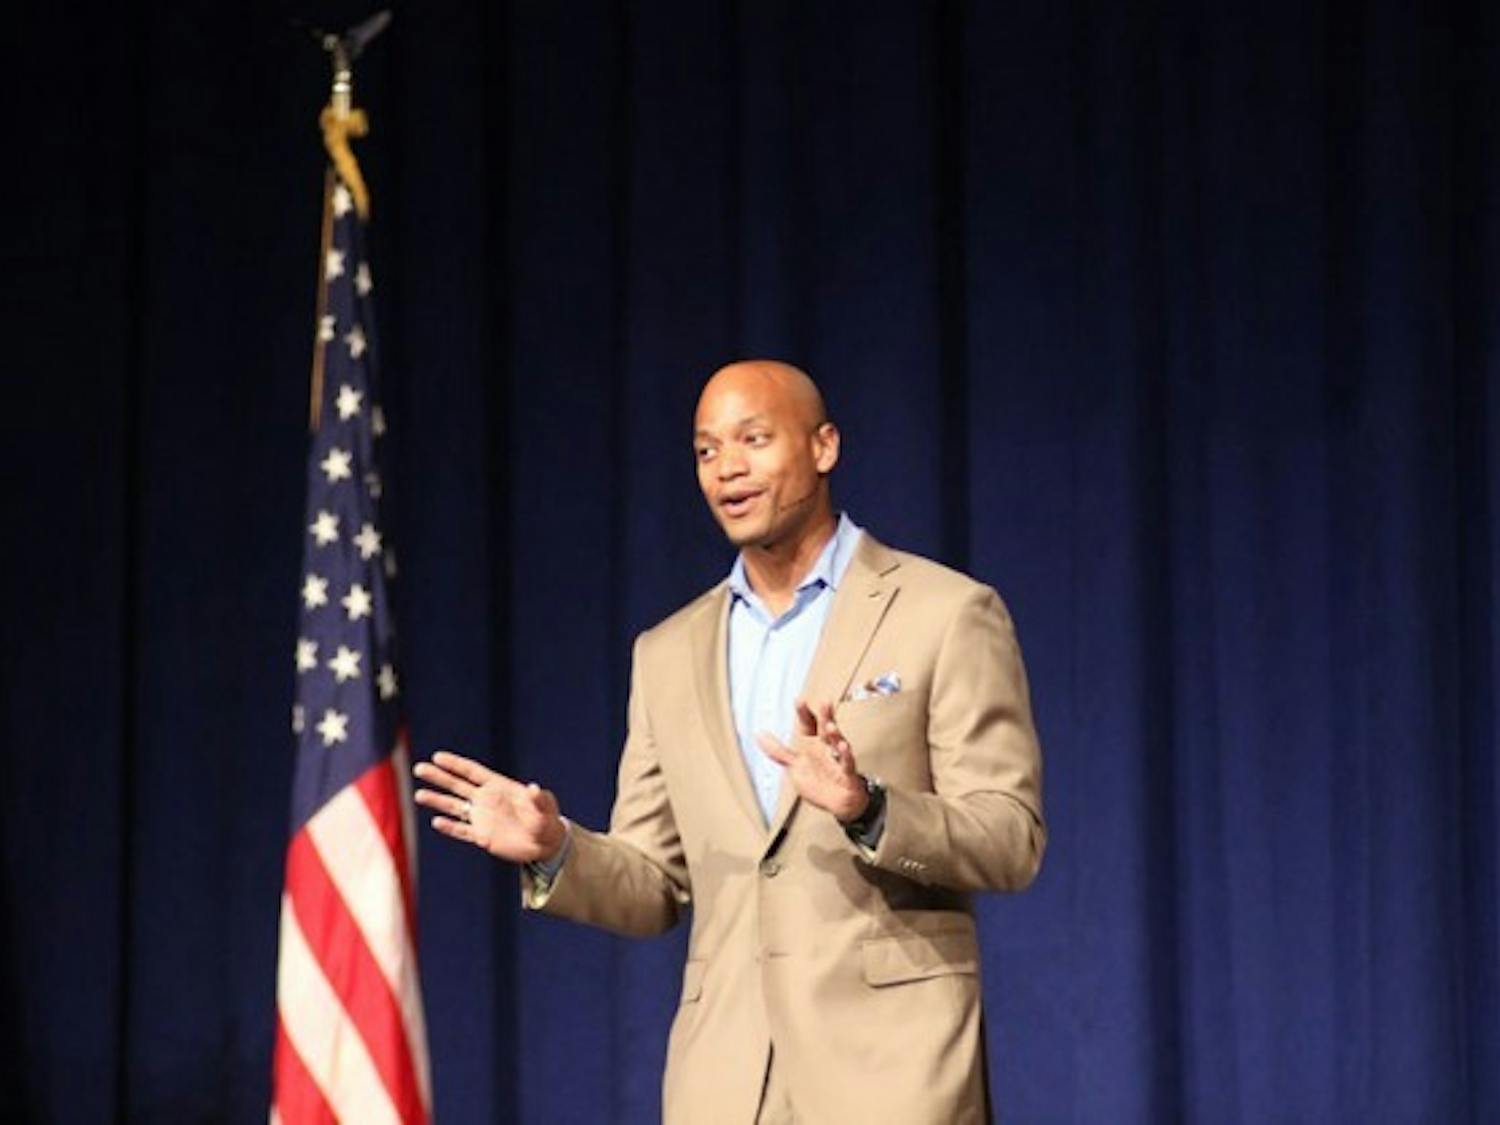 This week at UB, author, Army combat veteran and youth advocate Wes Moore spoke to UB students as the second guest in UB&rsquo;s Distinguished Speaker Series about taking advantage of higher education and using it to help those in need.&nbsp;Cletus Emokpae, The Spectrum